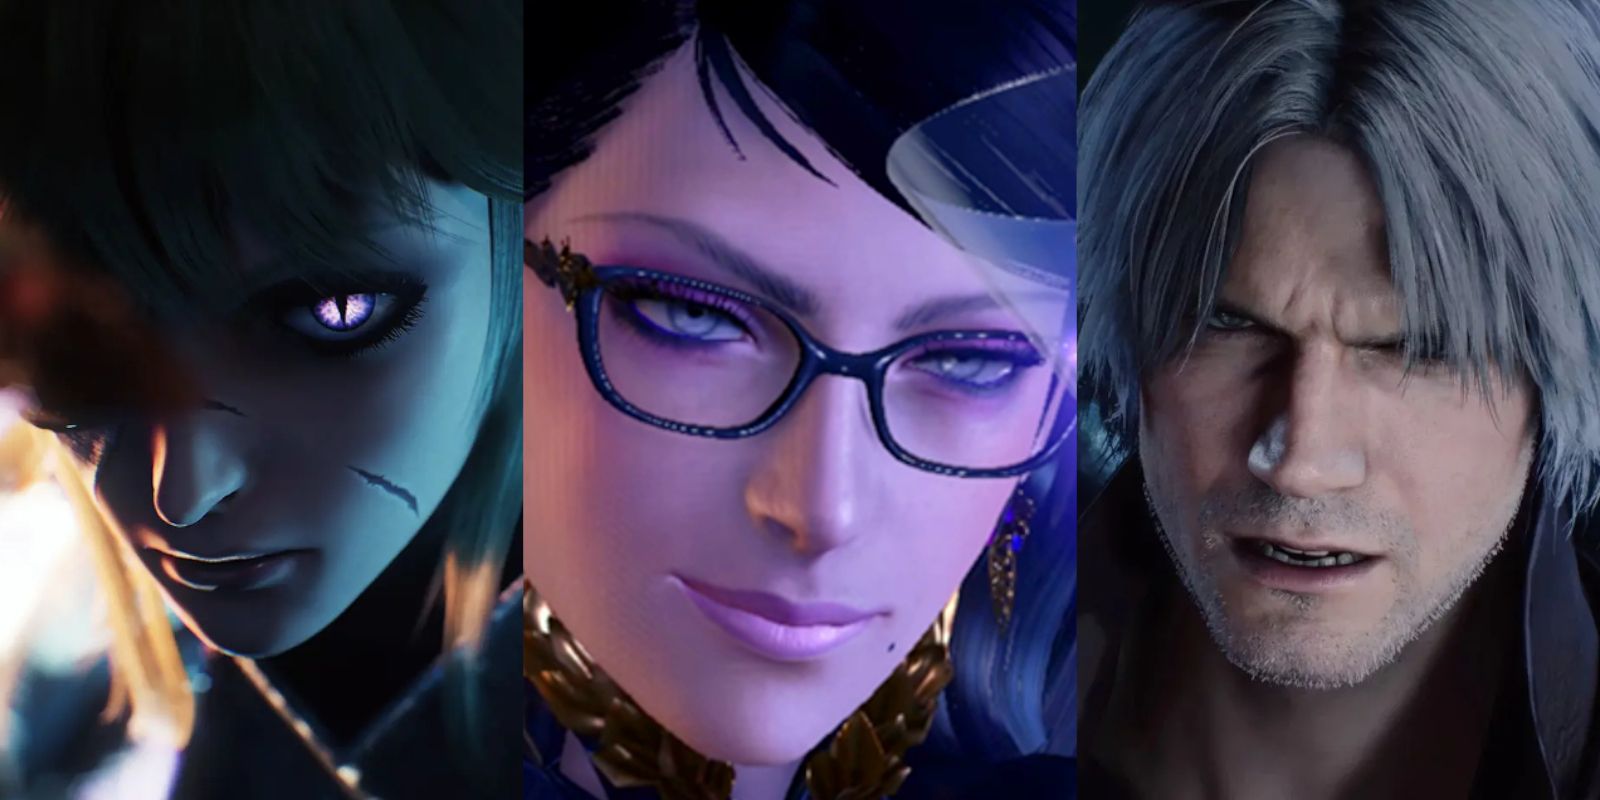 Bayonetta, Soulstice, and Devil May Cry 5 characters in a collage